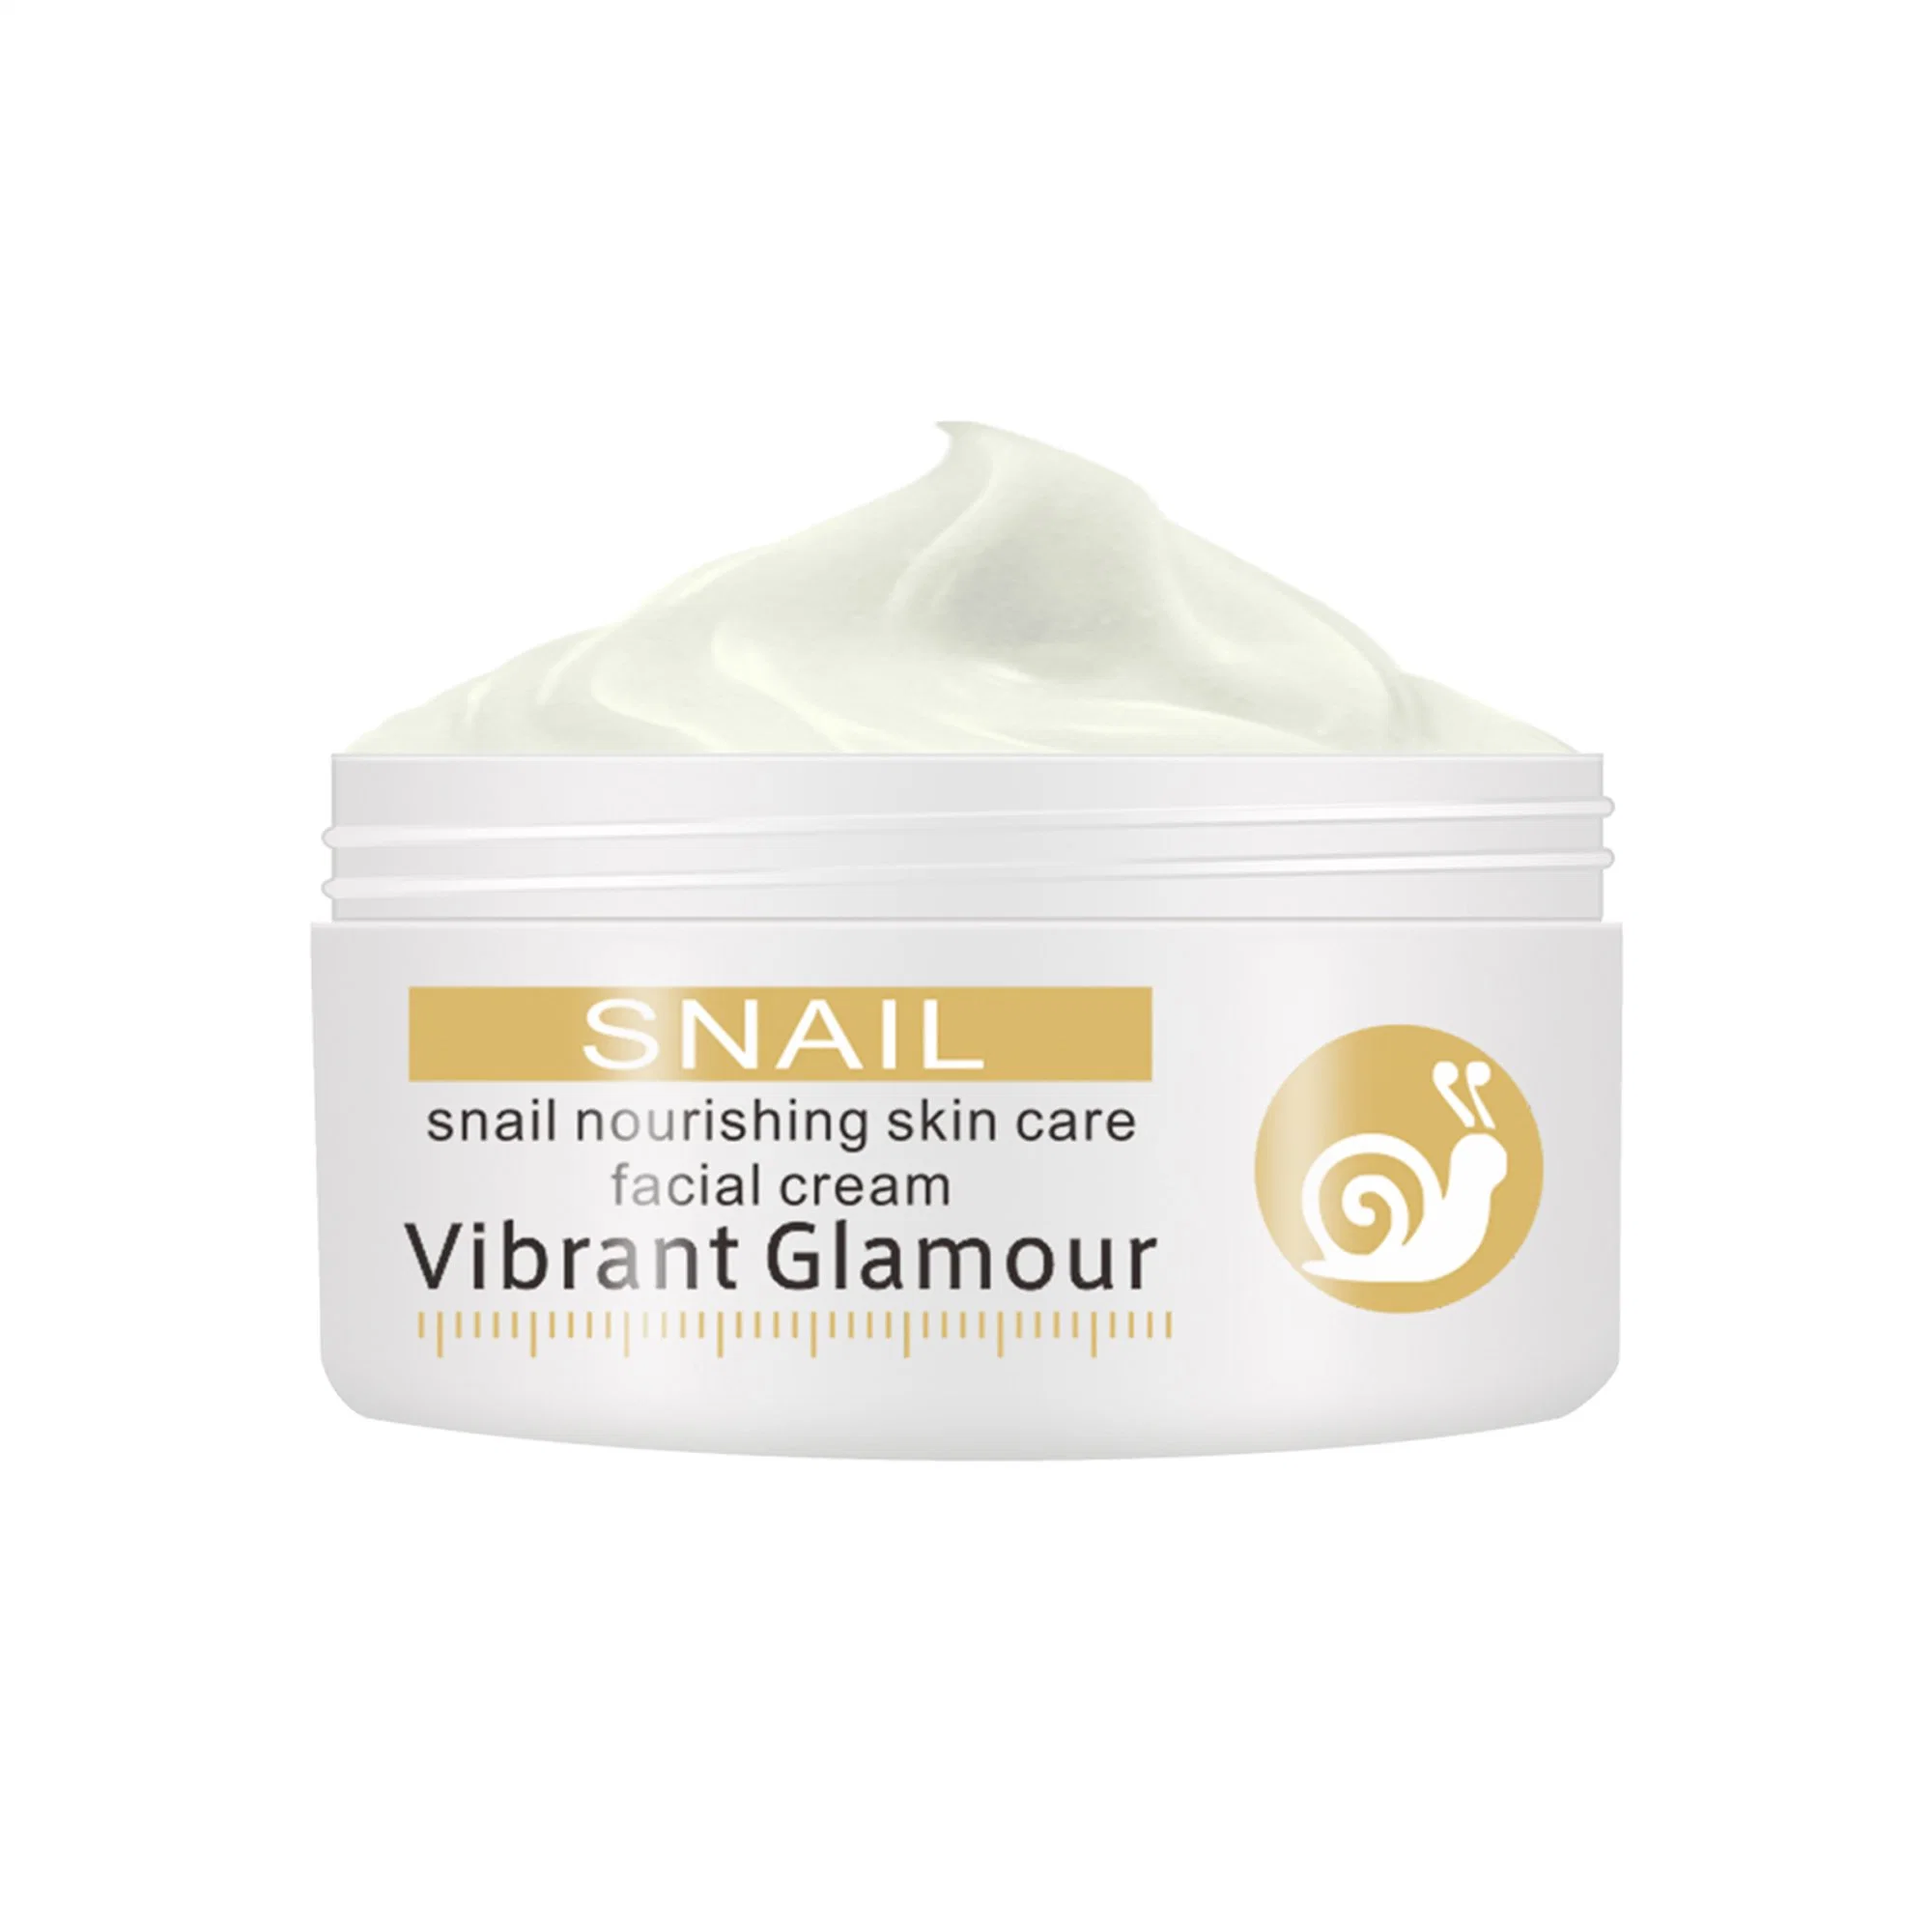 Vibrant Glamour Snail Skin Care Facial Cream Whitening Cream Contains Snail Secretion Extract to Dilute Spots Wrinkle Hydrating Cream